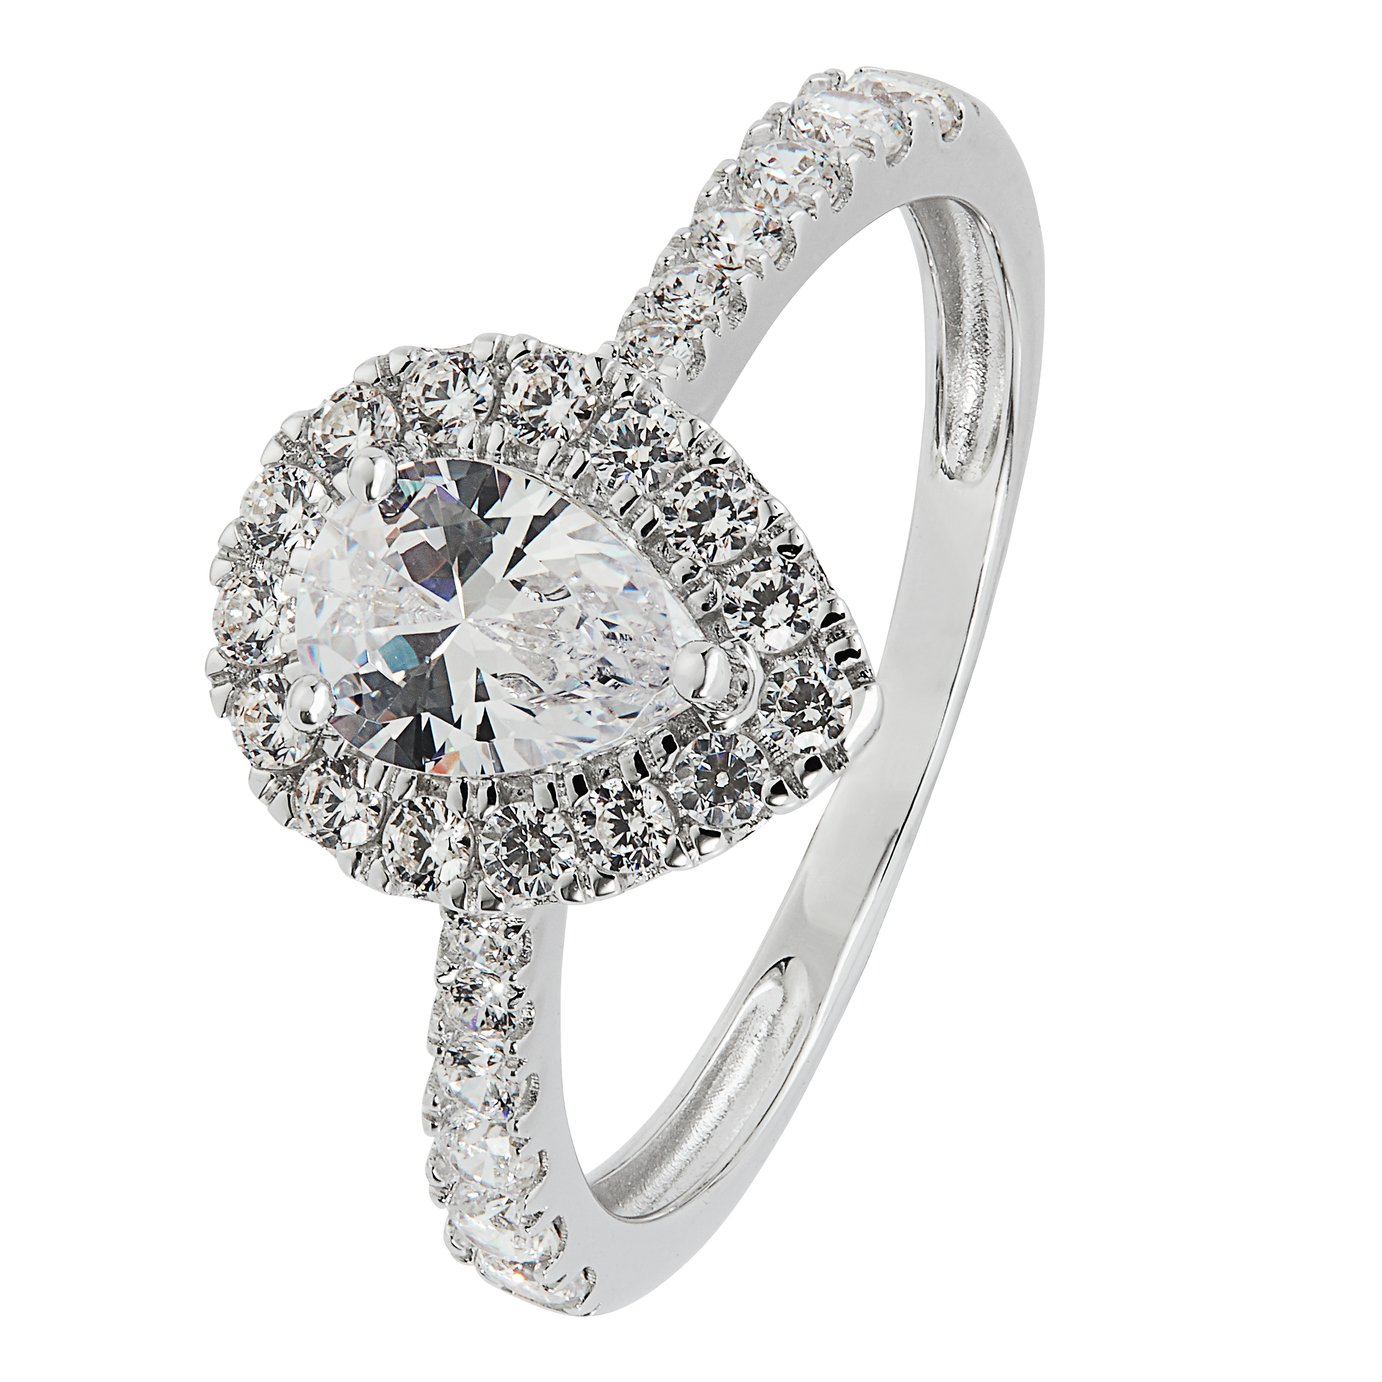 Revere 9ct White Gold Cubic Zirconia Halo Engagement Ring S